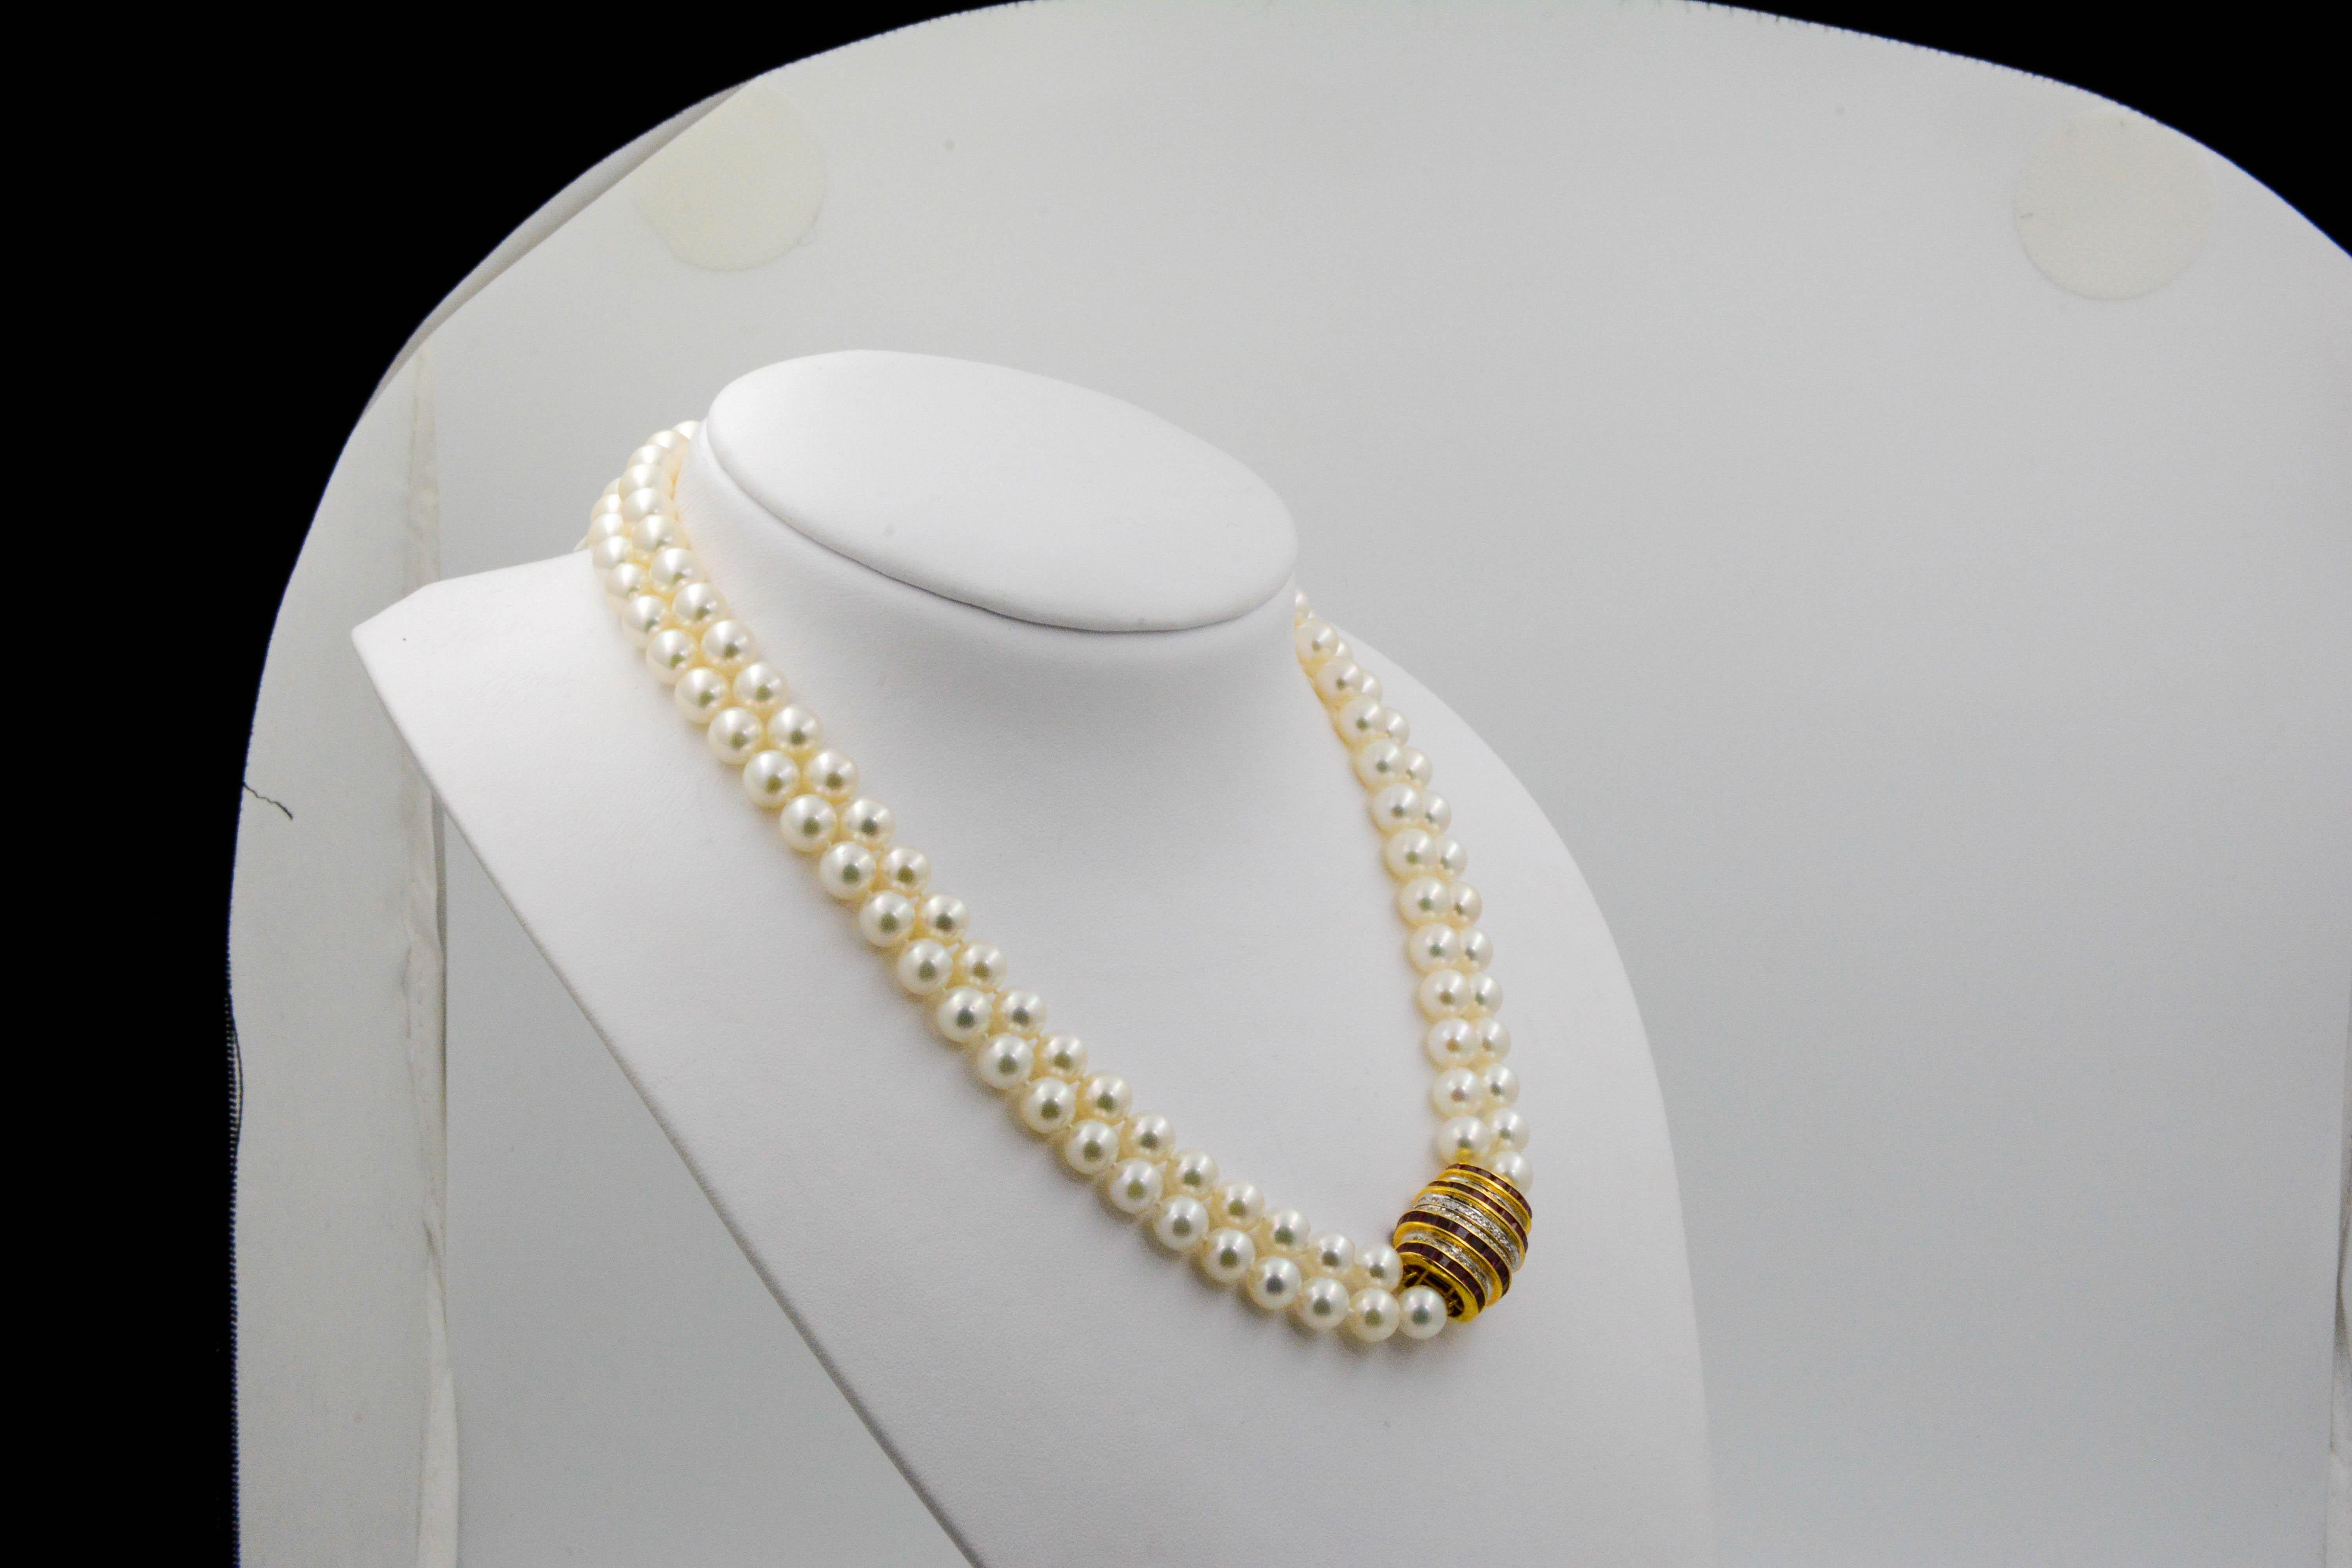 A double strand of white round Akoya pearls that measure 18 inches in length and is strung with 7.5-8 mm in diameter.  The stand is finished with a vintage 18kt yellow gold clasp set with vertical rows of round brilliant cut diamonds alternated with